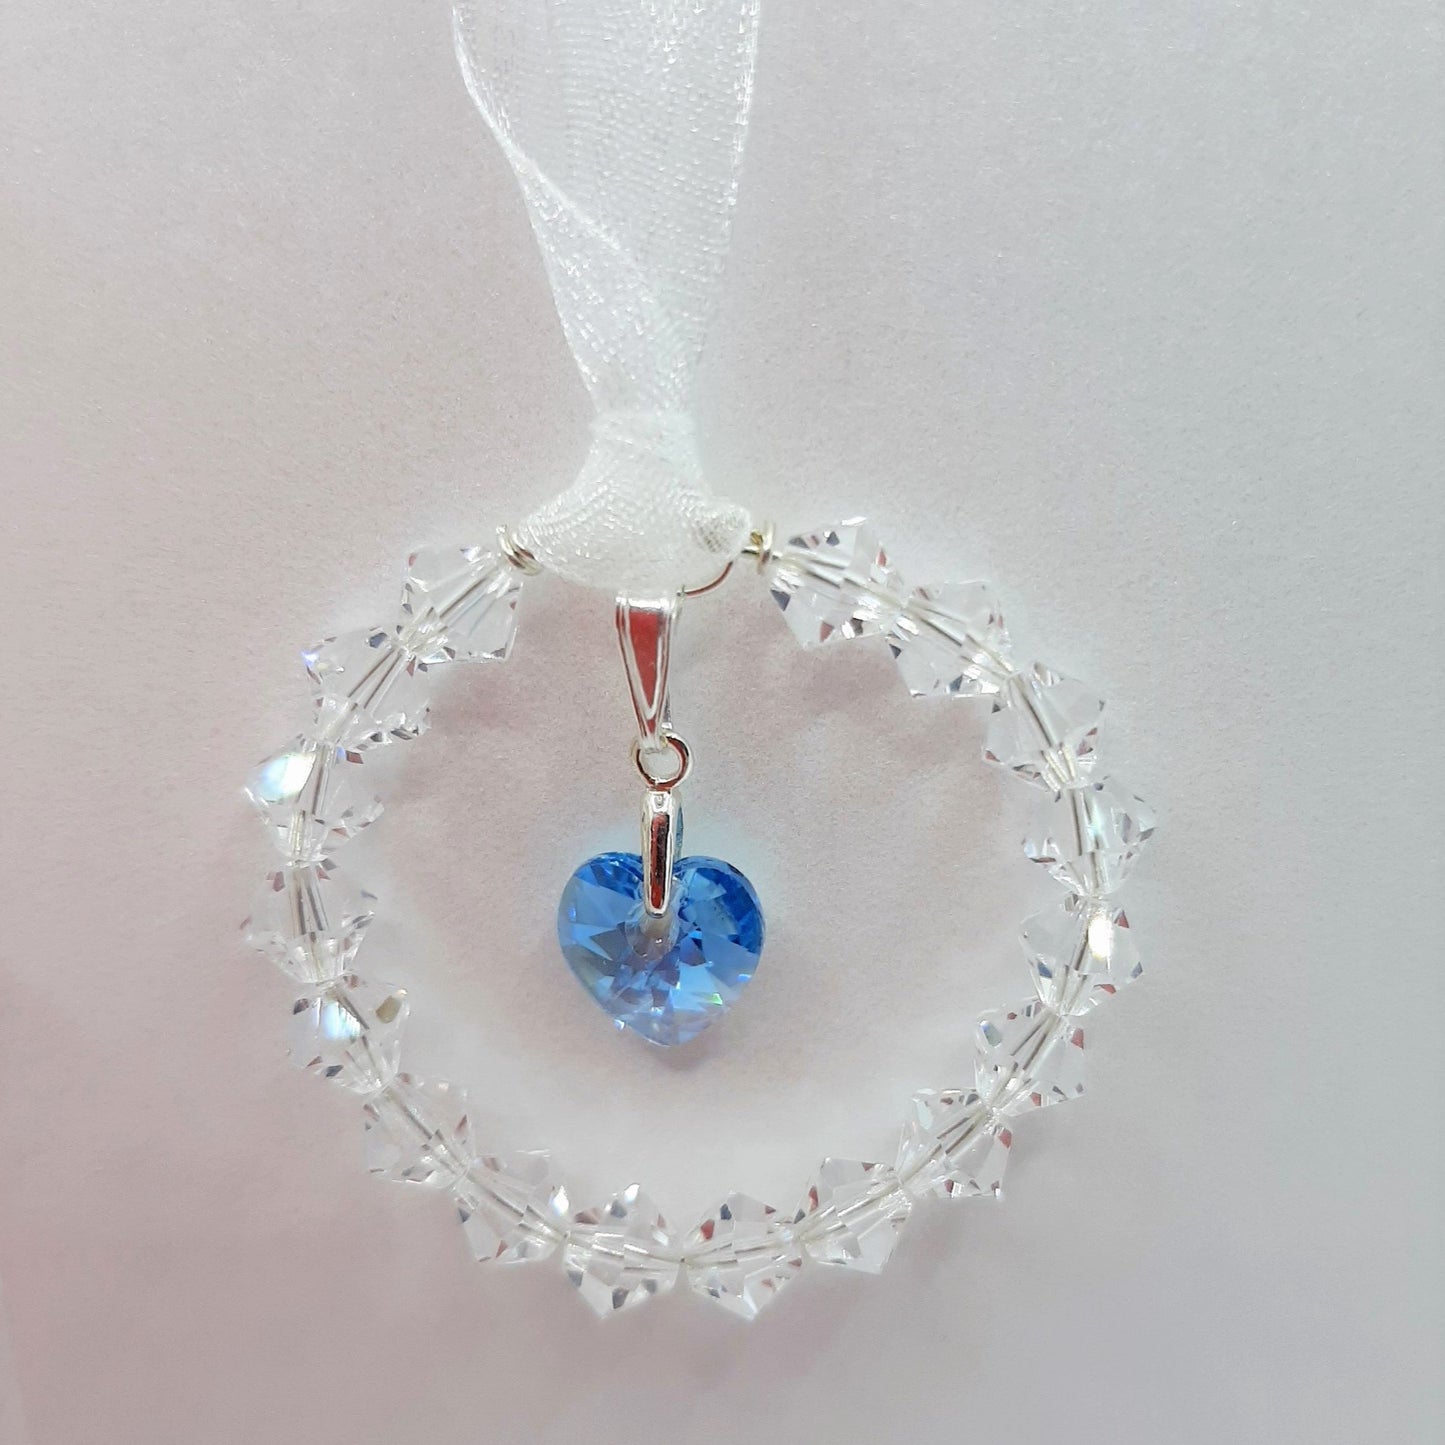 Ring of clear crystal circles surround a blue crystal heart, wedding bouquet charm